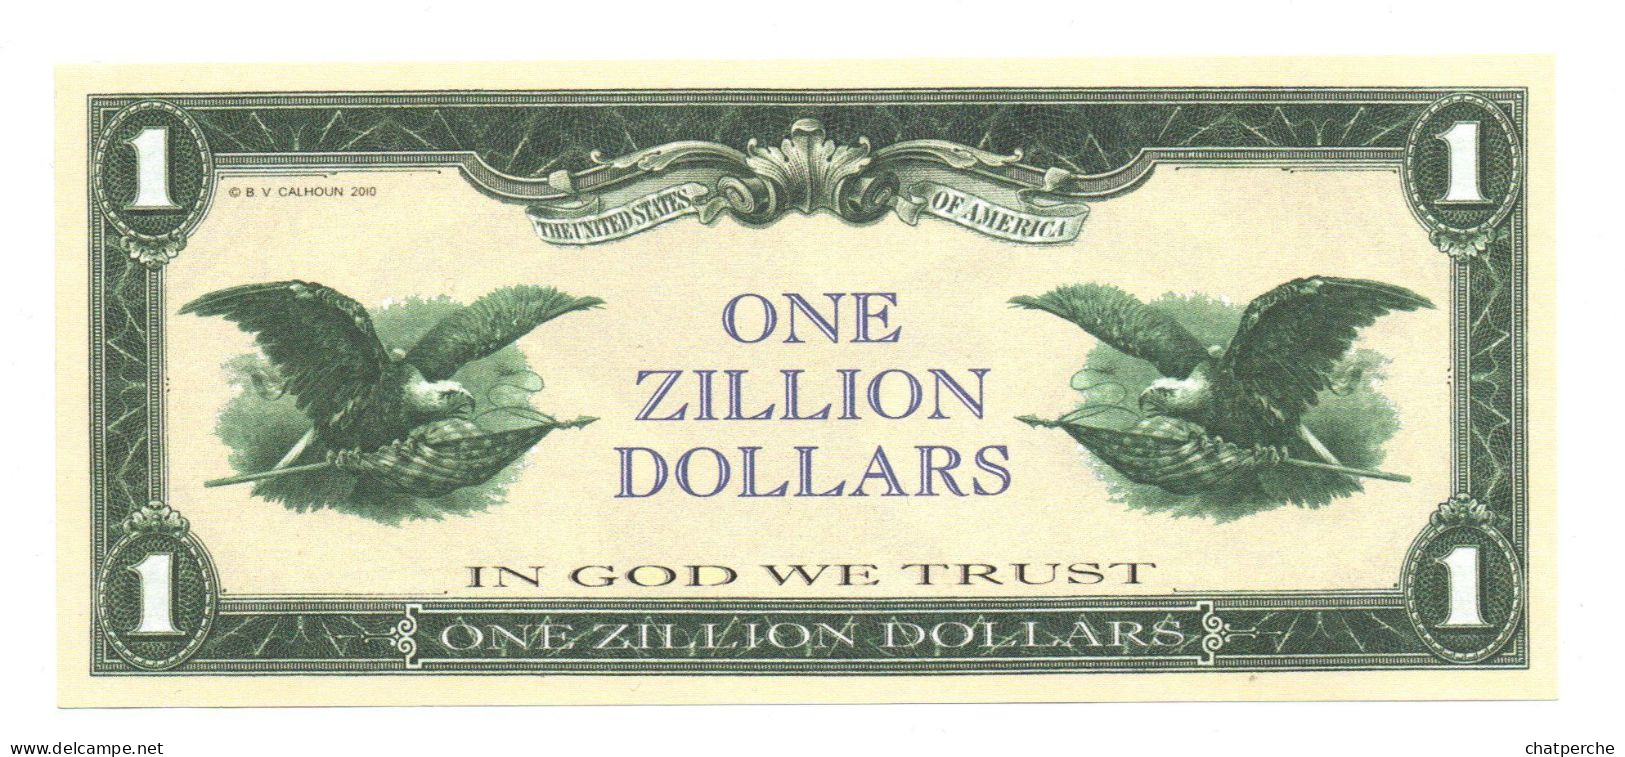 POUR COLLECTIONNEUR FAUX-BILLET FAKE ONE ZILLION DOLLARS AIGLE USA THE UNITED STATES OF AMERICA - Errori